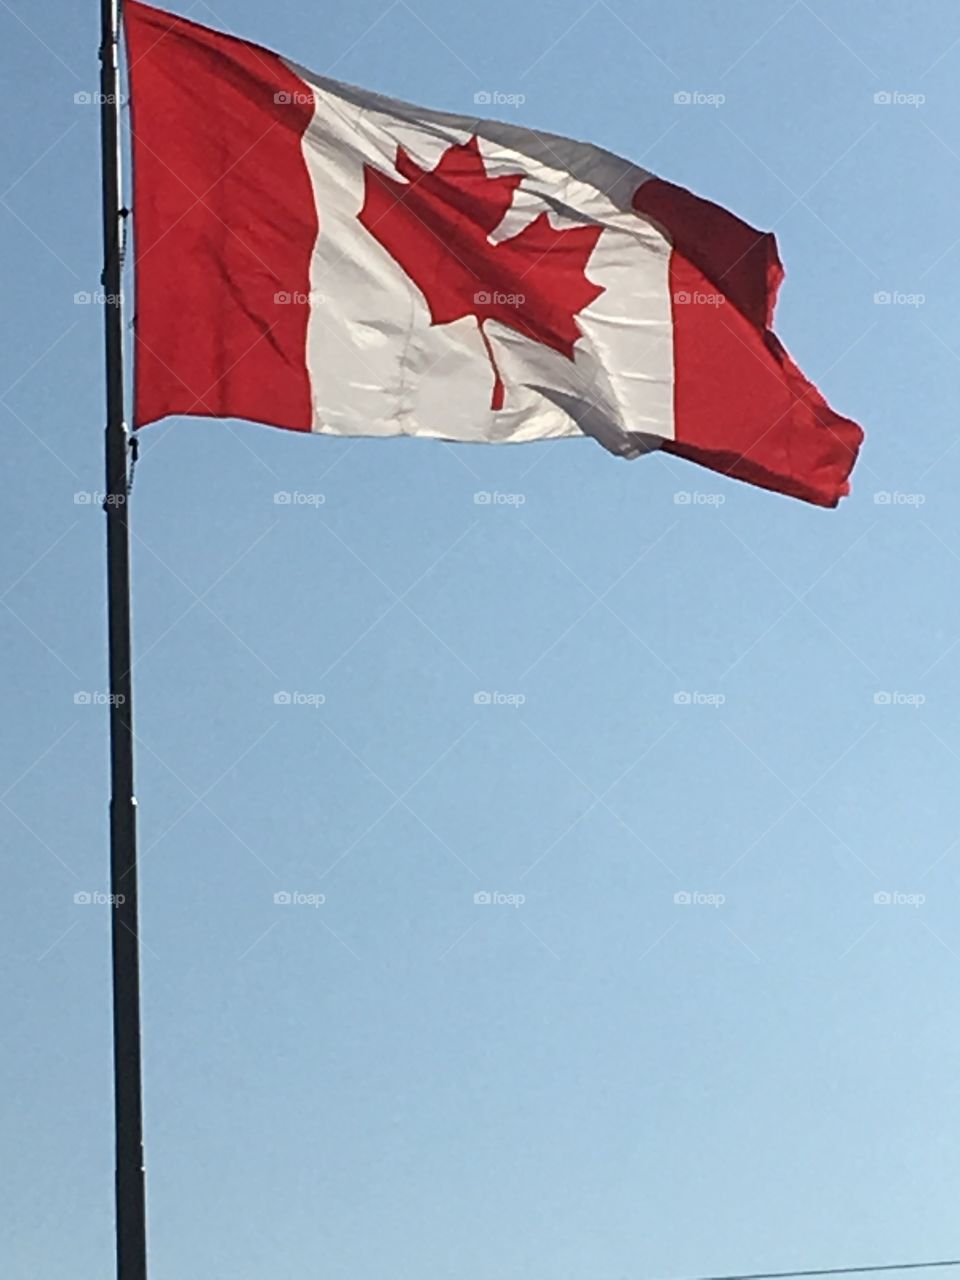 Canadian flag blowing in the wind 